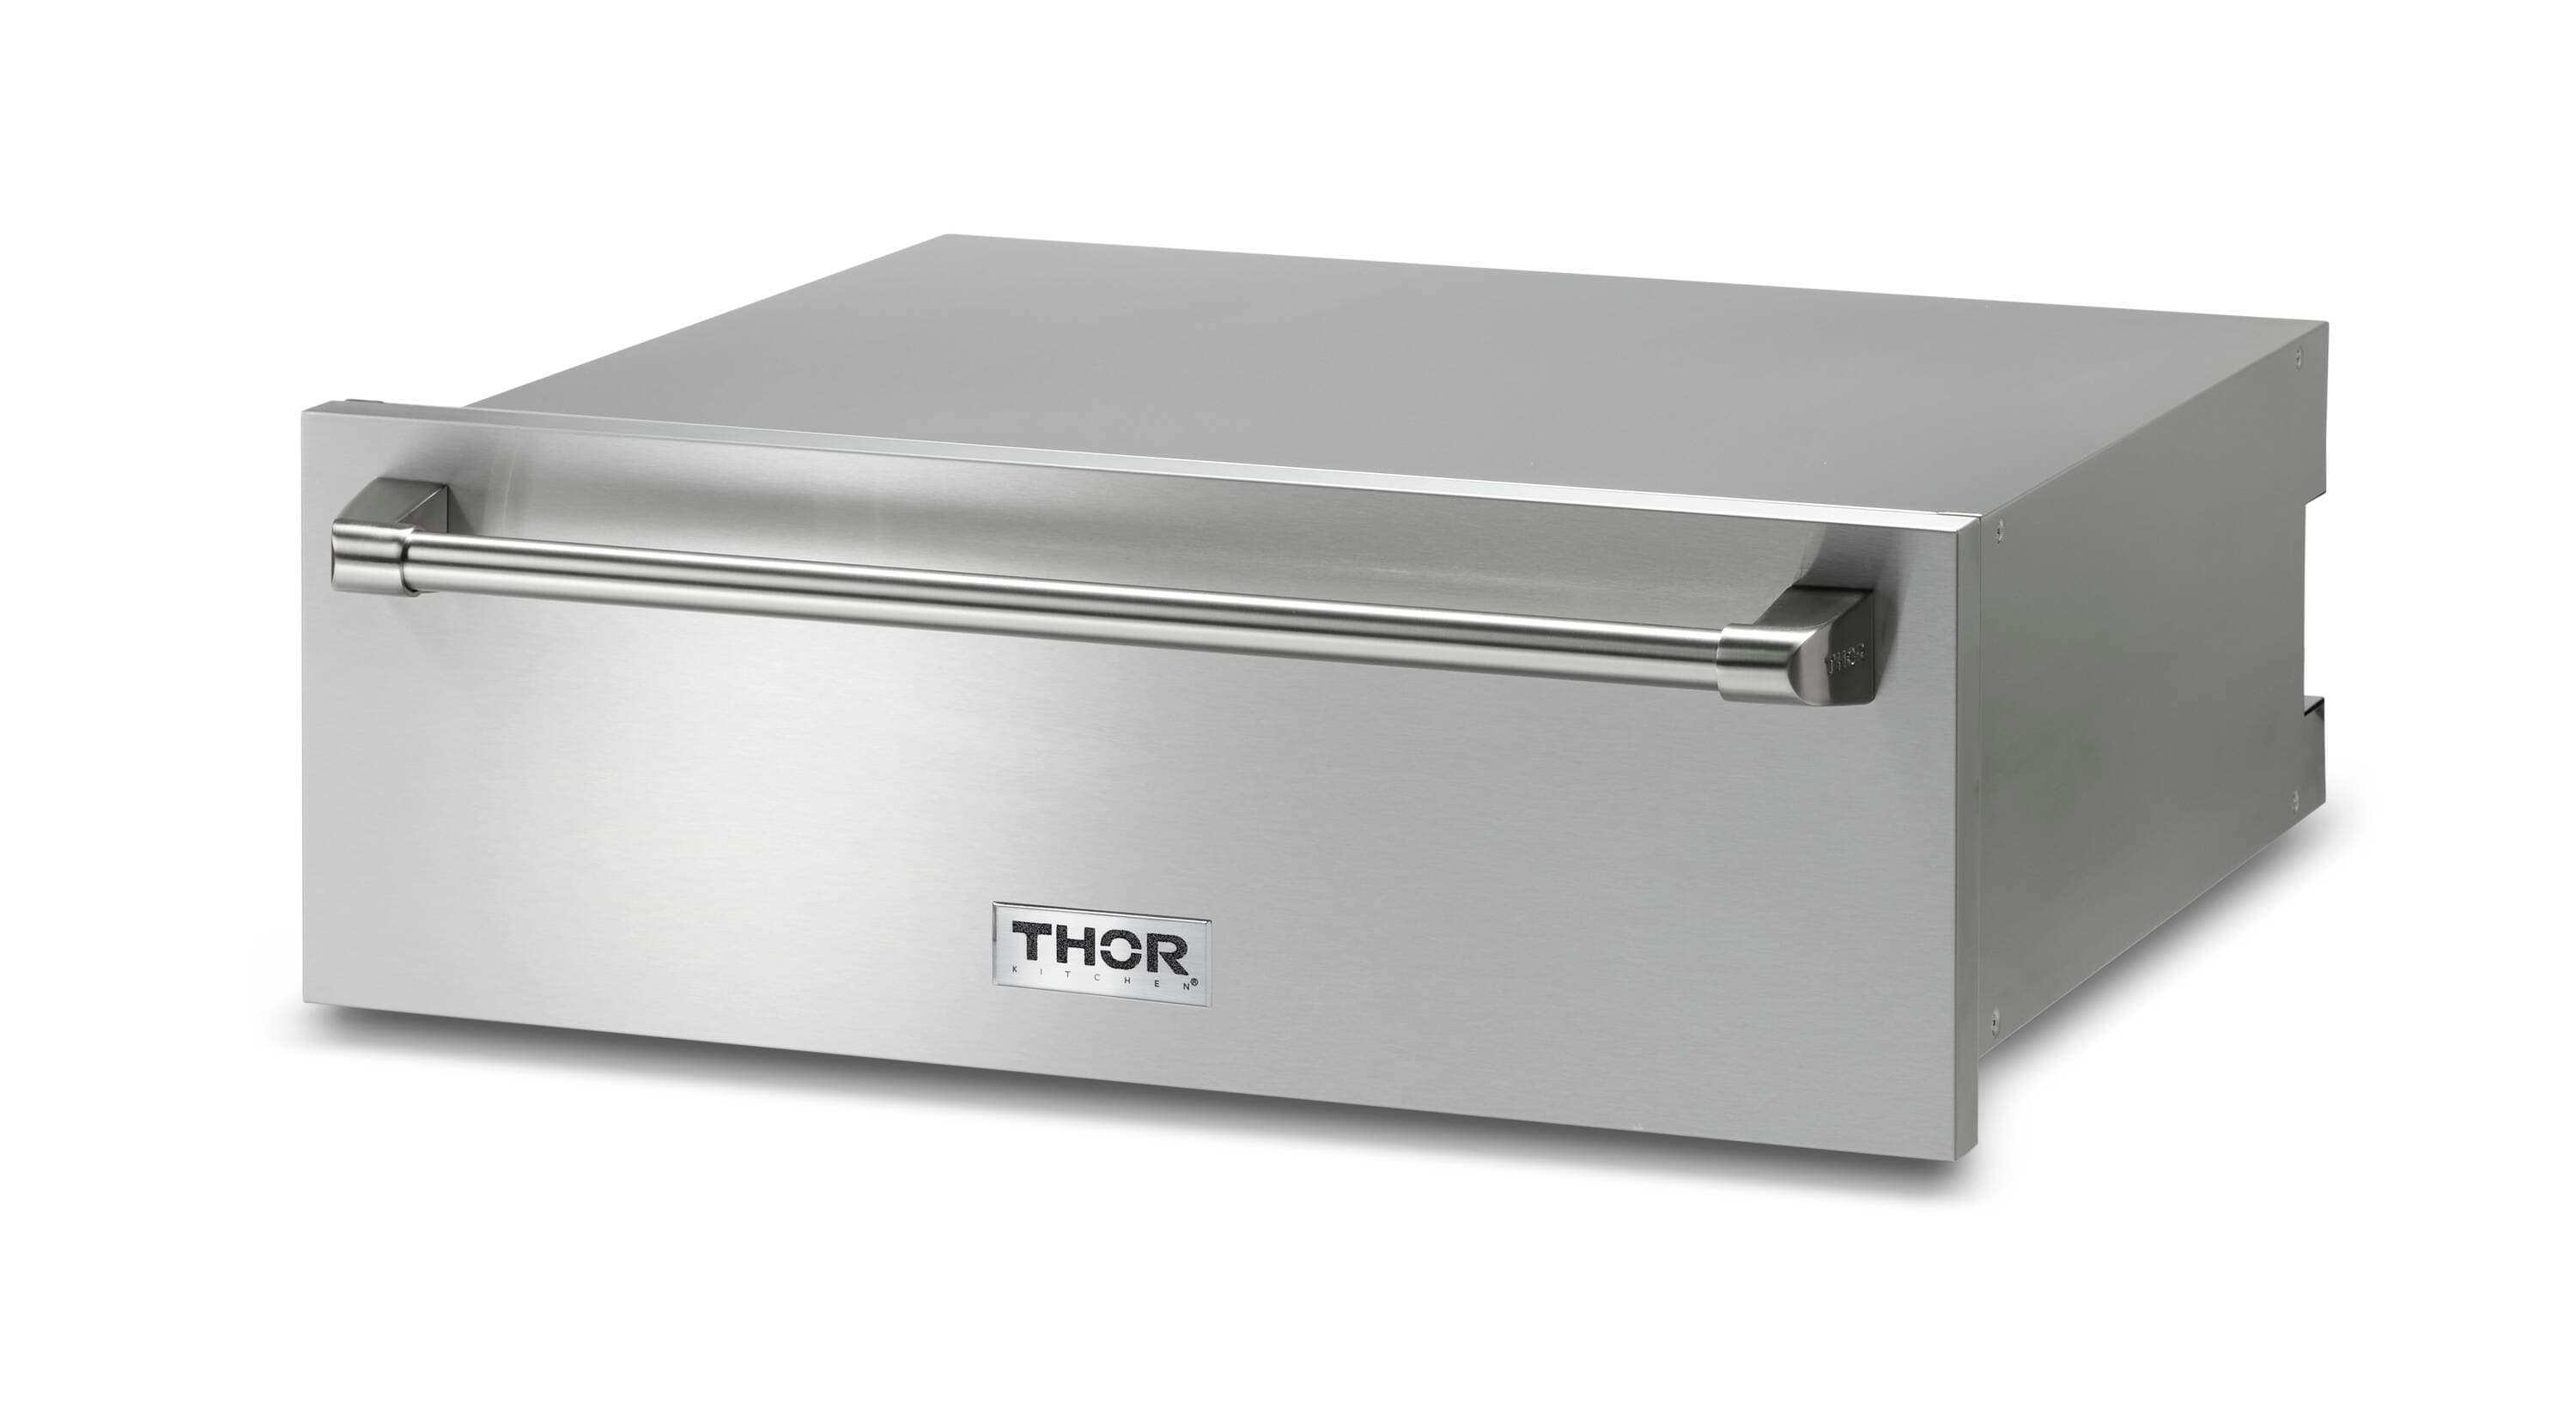 Thor Kitchen 30in Warming Drawer (Stainless Steel) at